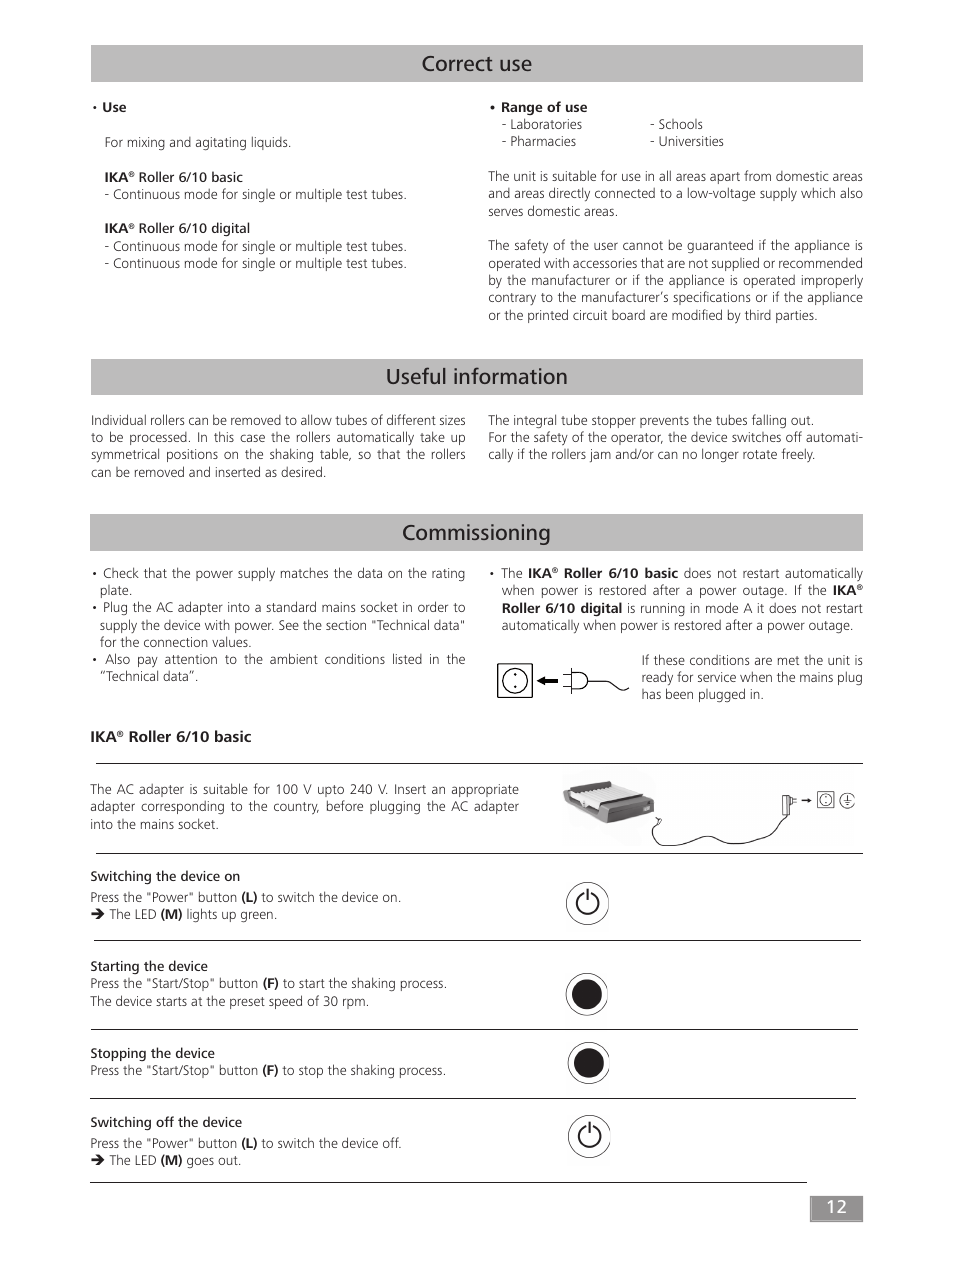 Correct use, Useful information, Commissioning | IKA ROLLER 10 digital User Manual | Page 12 / 48